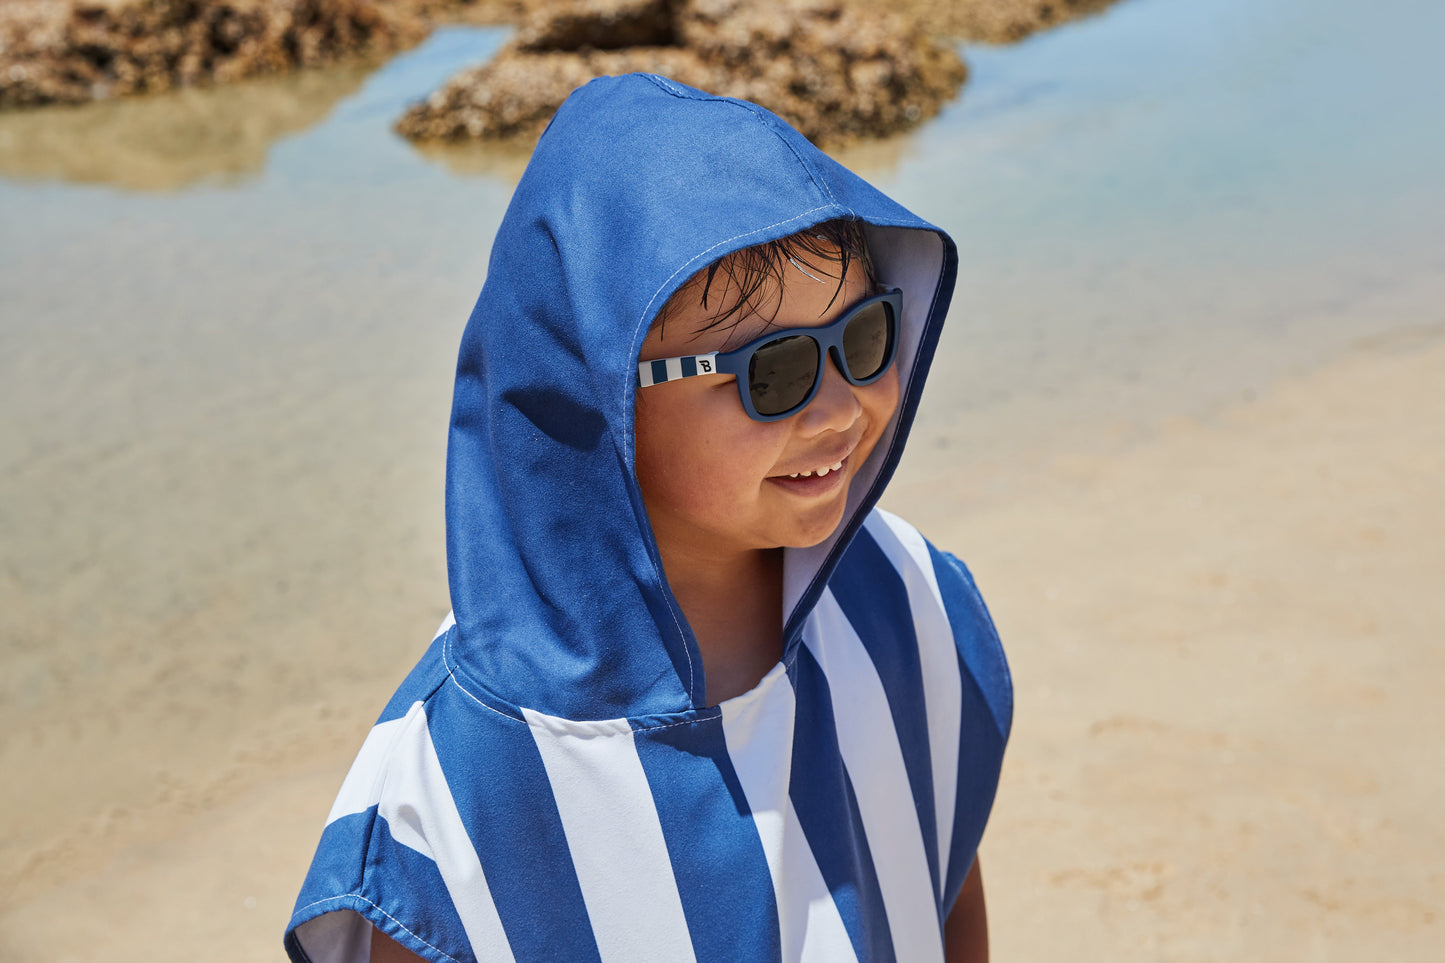 Kids Poncho Whitsunday Blue Ages 4-7 by Dock and Bay 